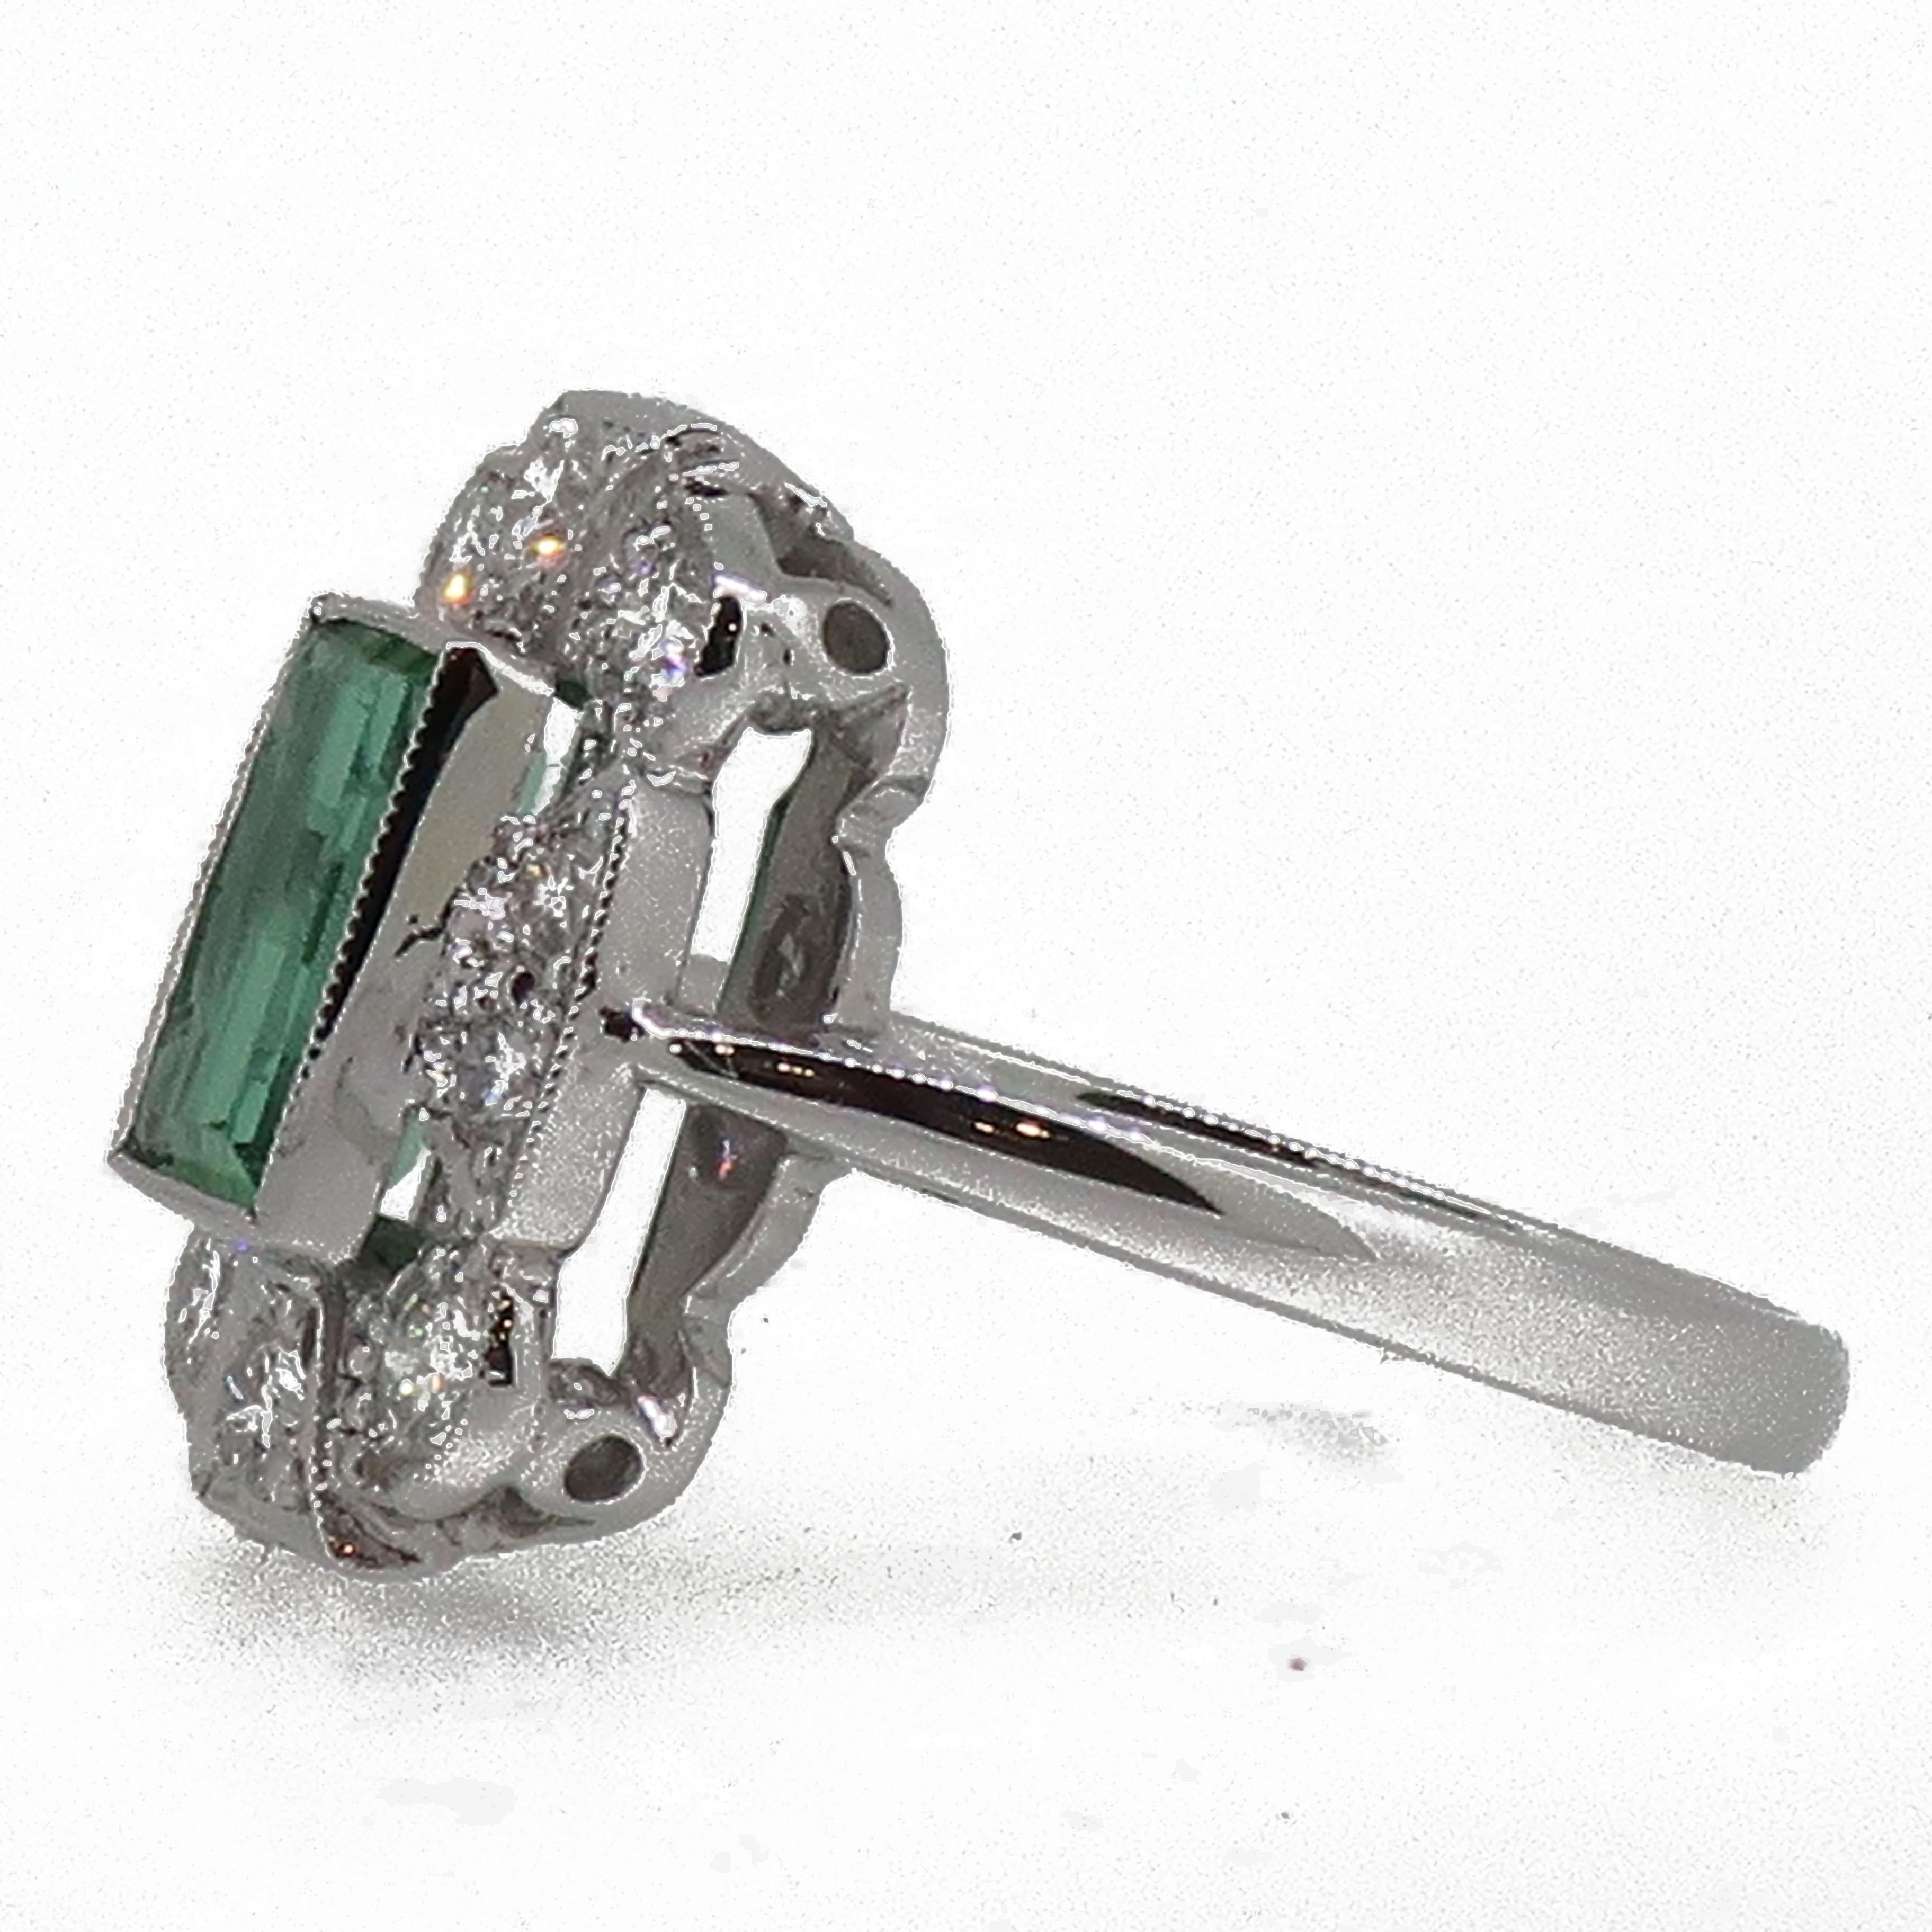 18 Karat Gold Baguette Cut Green Tourmaline & Diamond Art Deco Style Cluster Ring

A striking baguette cut green tourmaline set in a fine millegrain setting weighing 1.24ct, surrounded by ten round brilliant cut diamonds all set in a fine mill-grain